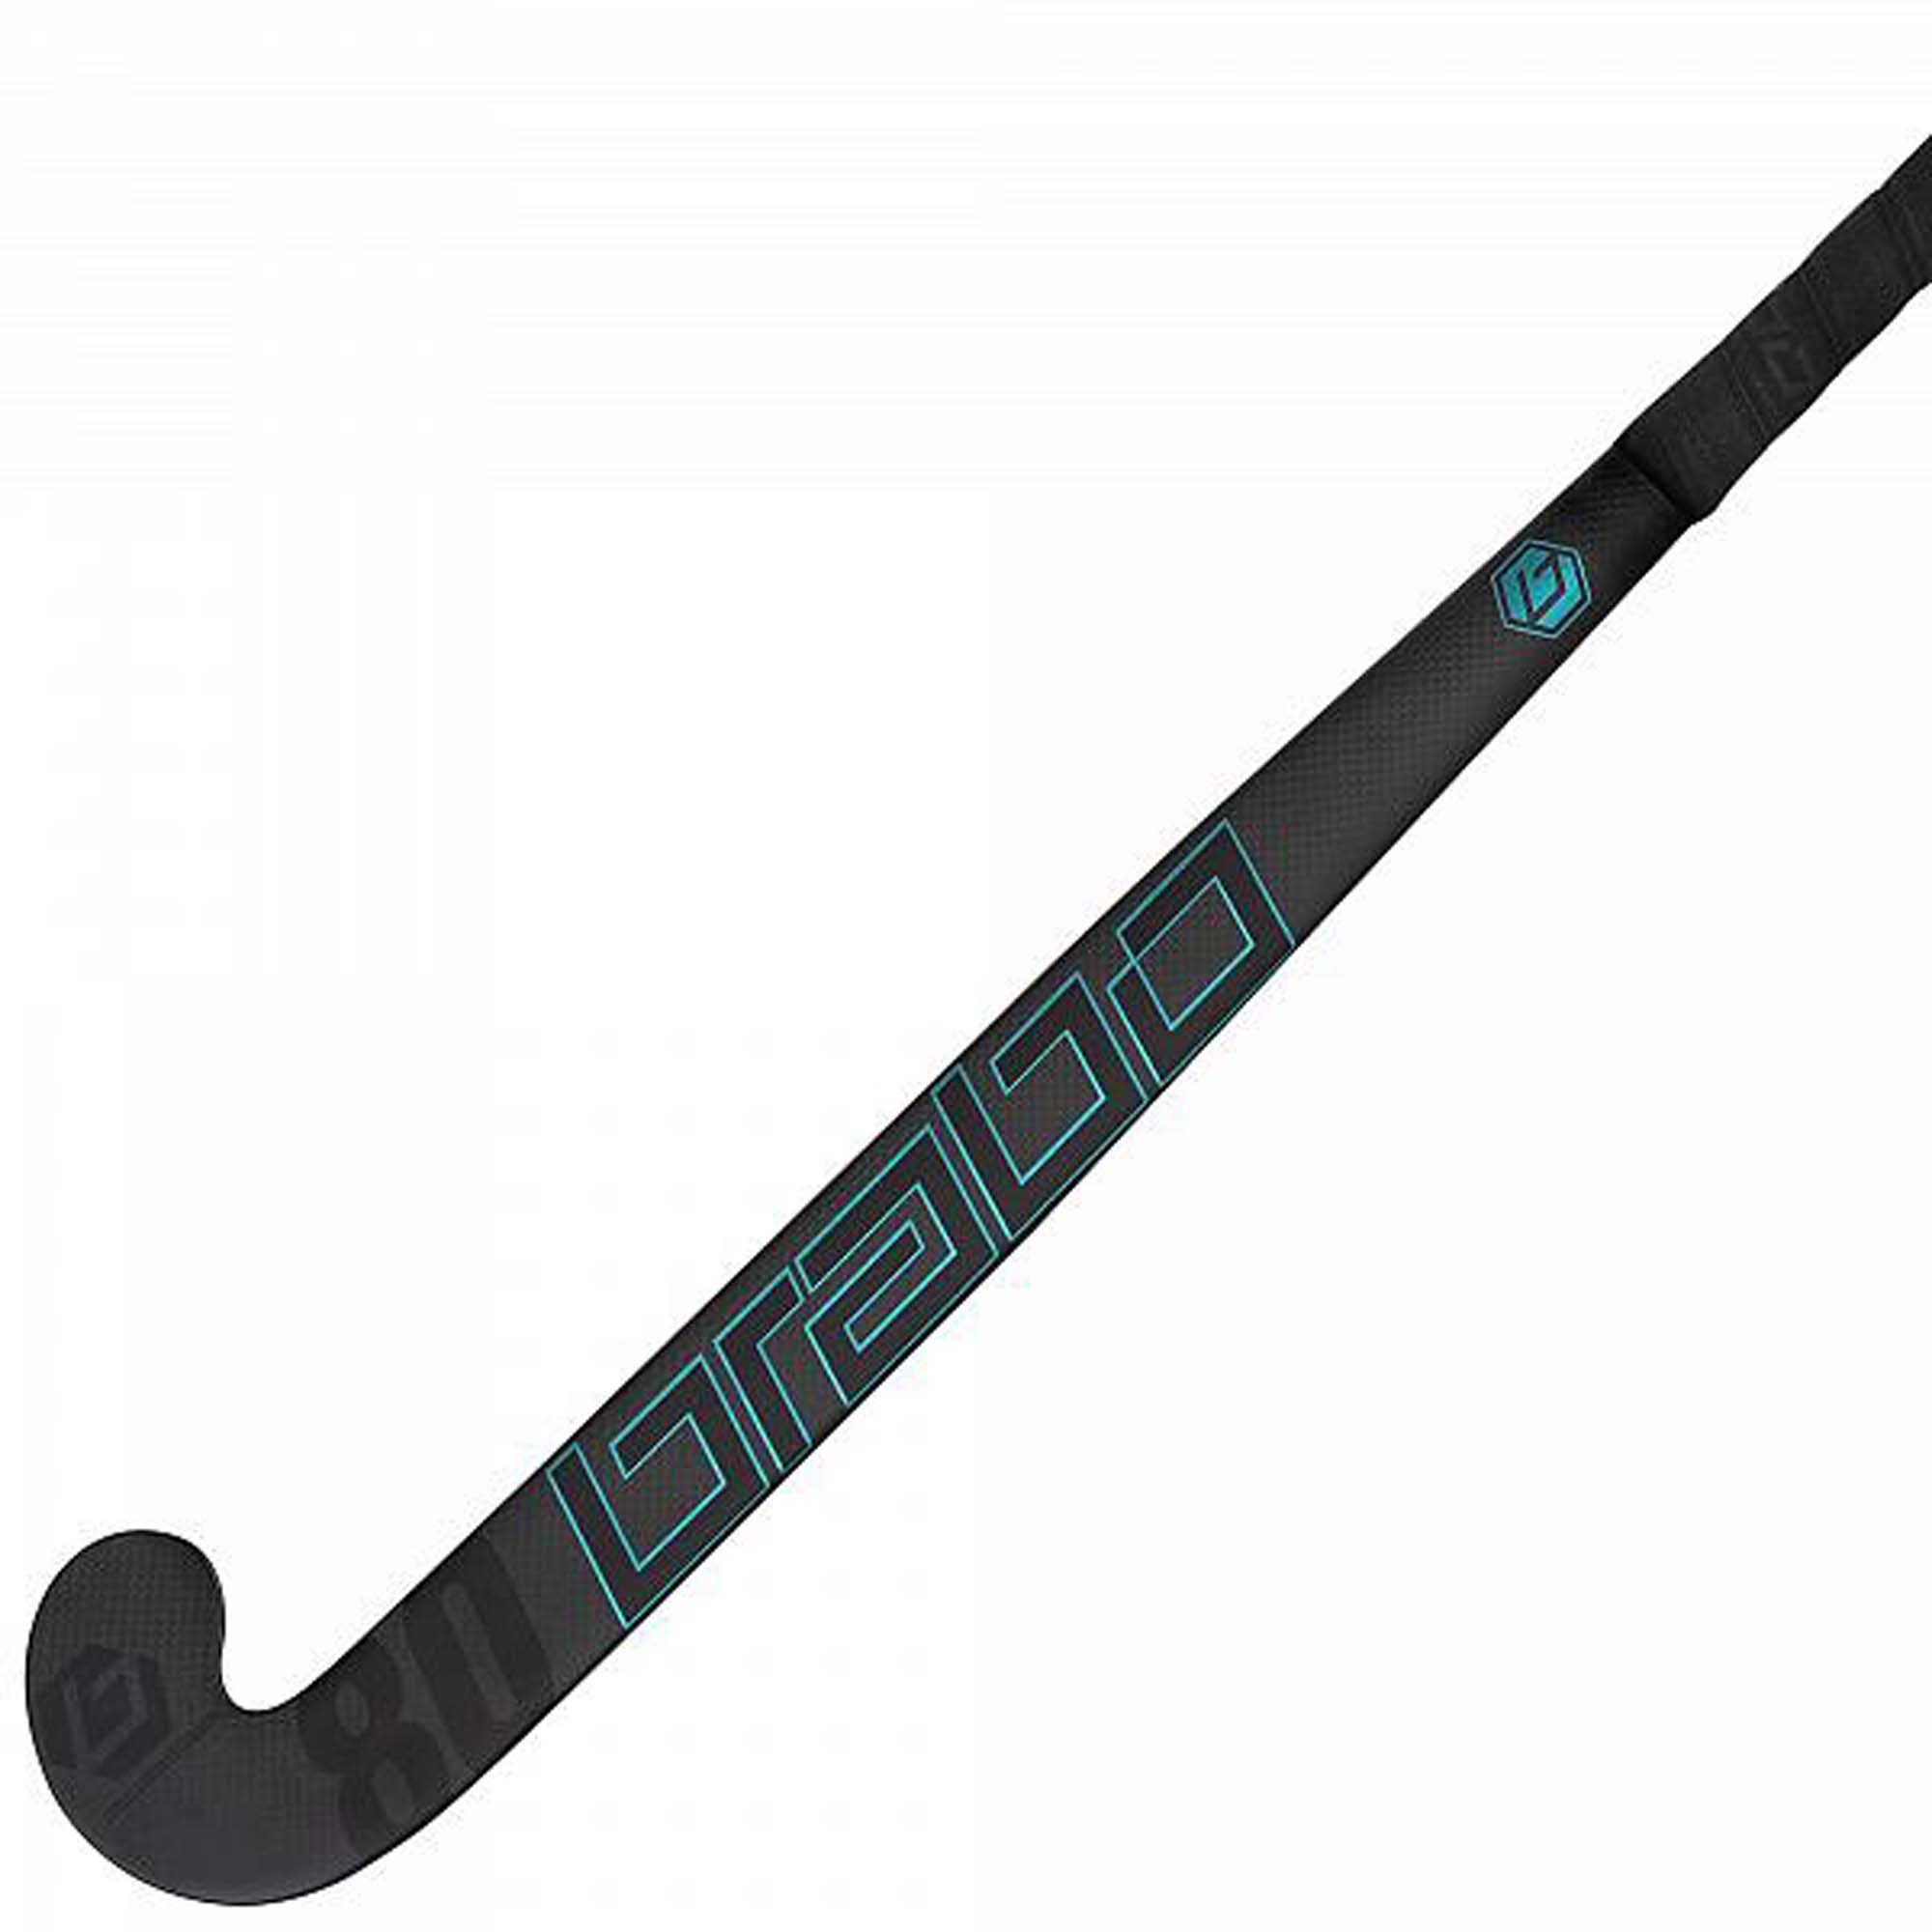 BRABO Pure St. Traditional Carbon 80